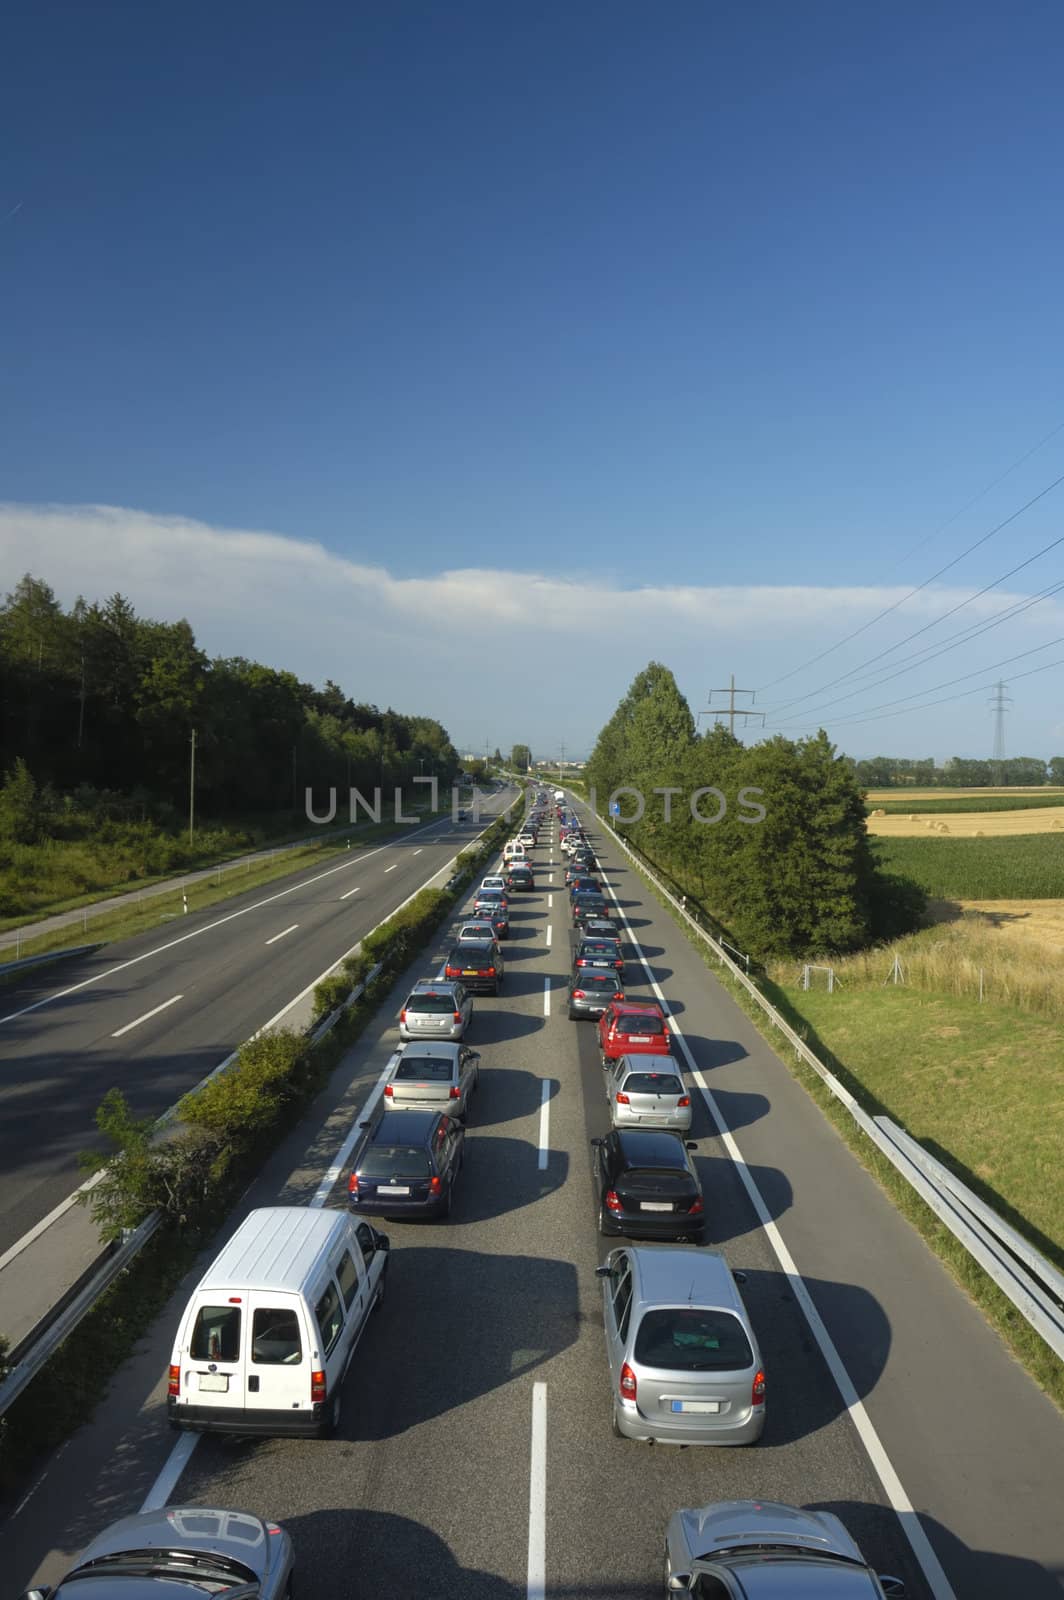 A line of stationary traffic stretches away into the distance on one side of the freeway (motorway, autoroute, autobahn) whilst, in the other direction it is completely clear.